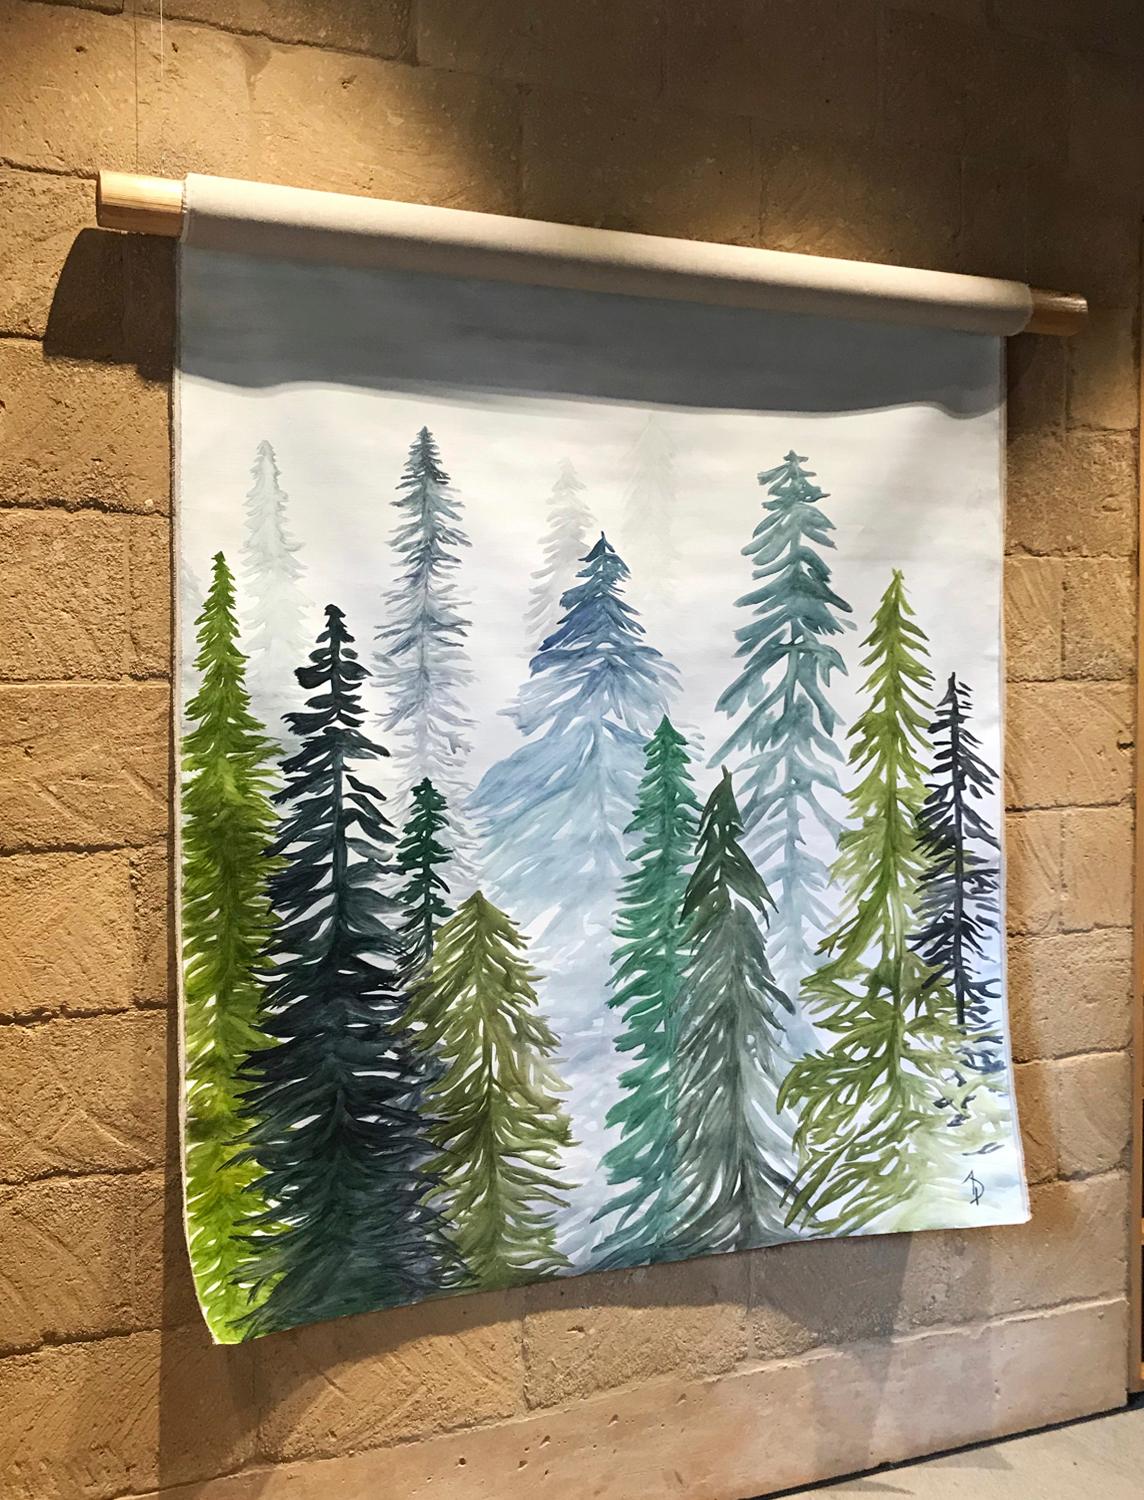 Beautiful Forest on Hanging Canvass - Painting by Arozarena De La Fuente